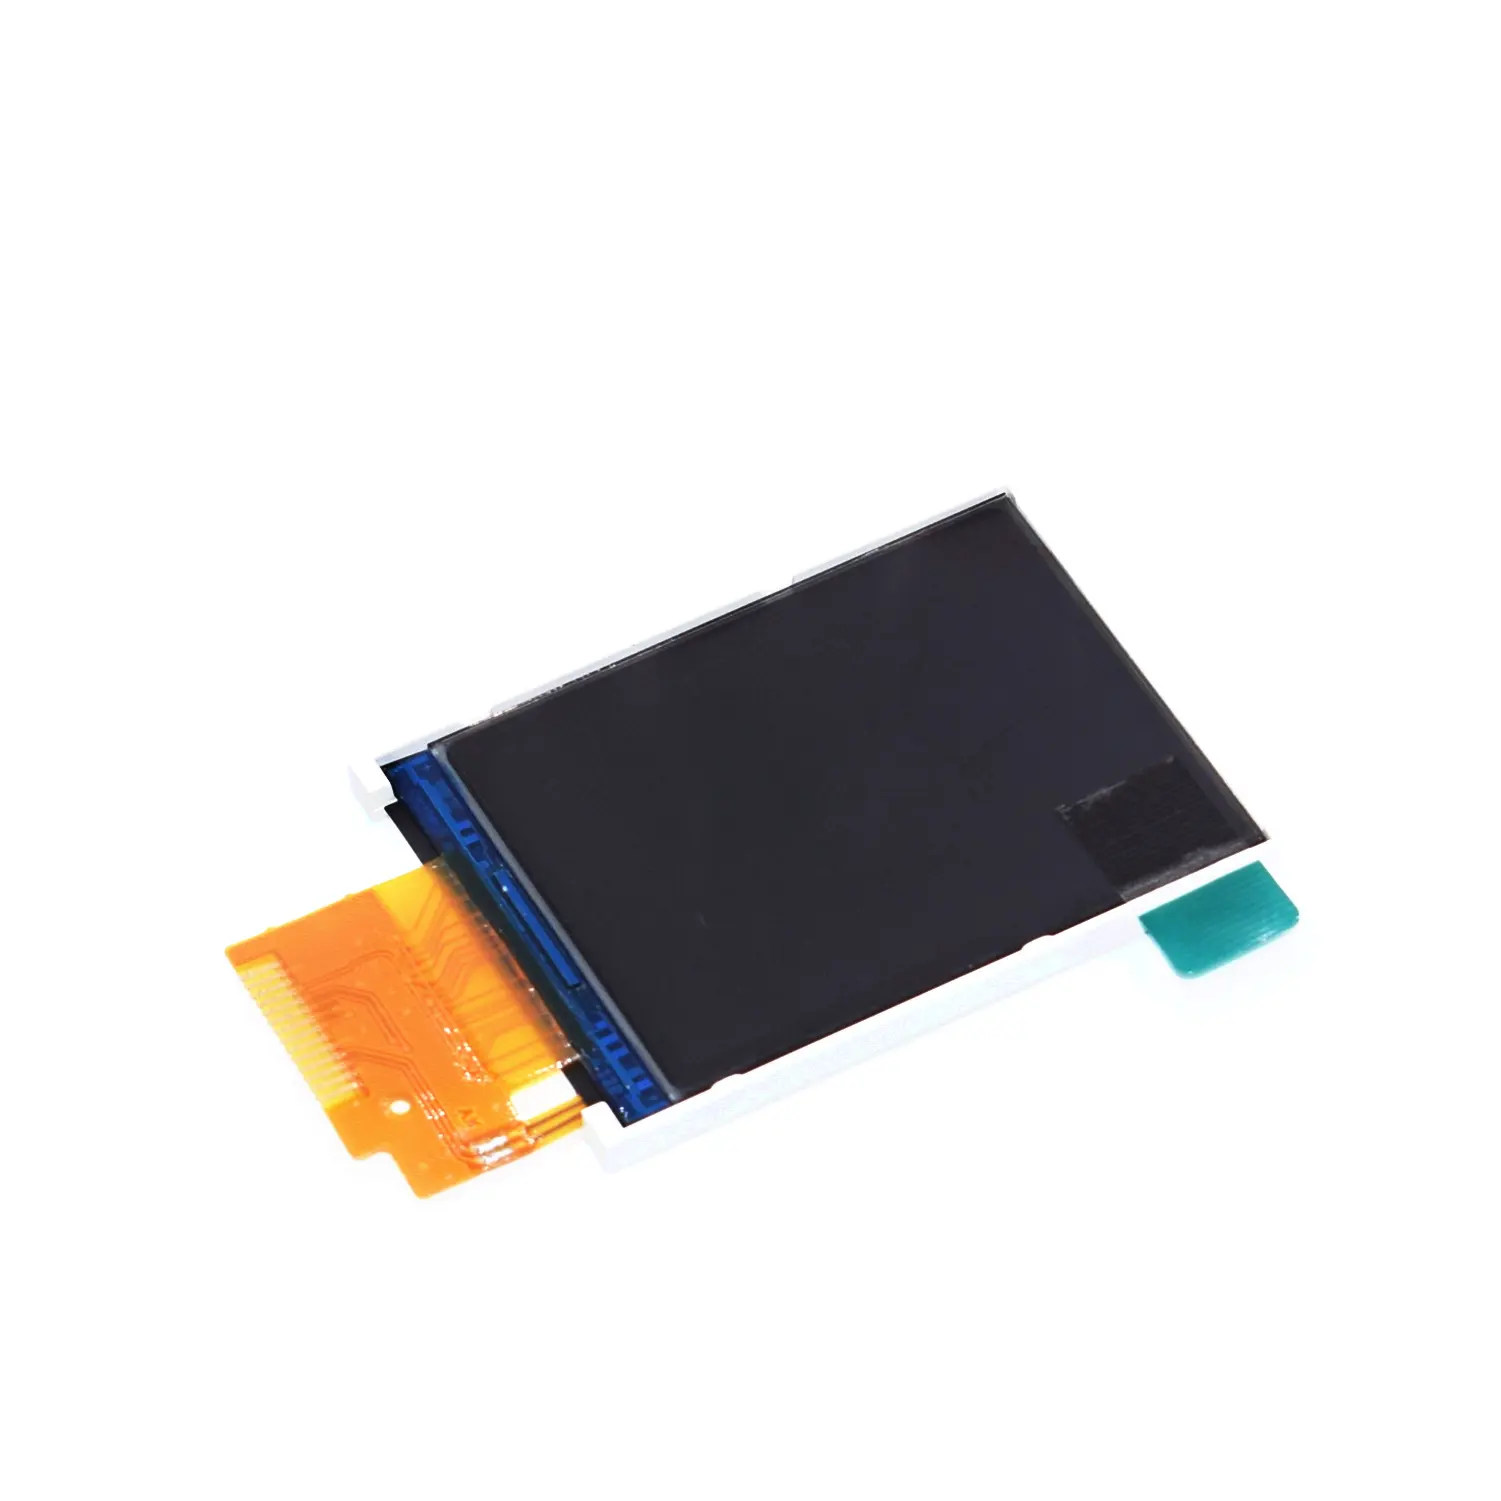 1.8" 1.77" inch Color TFT LCD Display Module 128x160 Display ST7735 SPI Serial interface IO Ports Diy Kit For ARDUINO